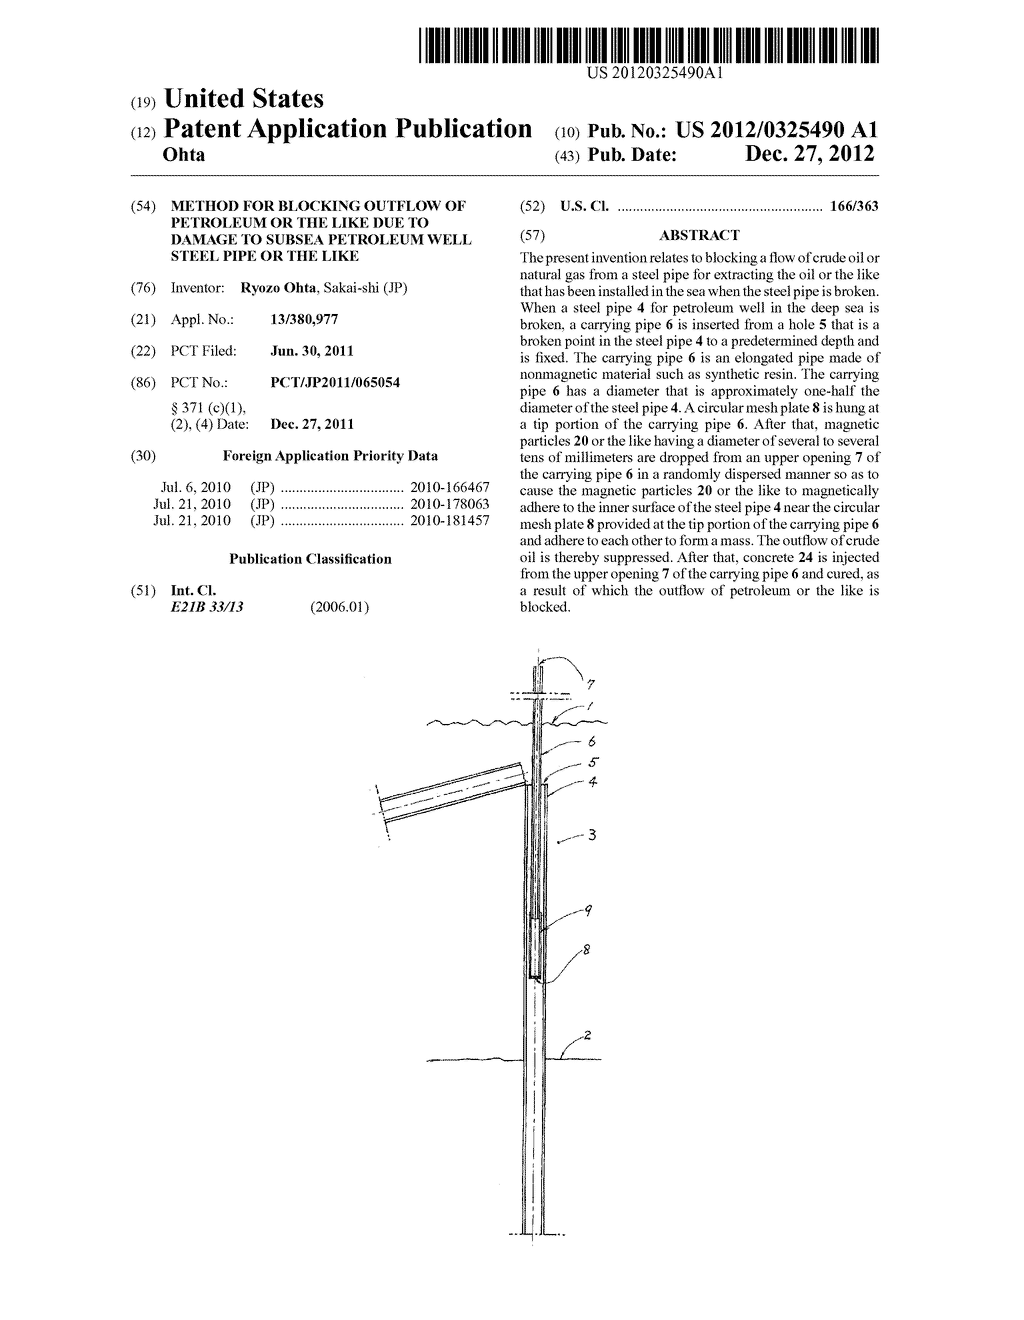 METHOD FOR BLOCKING OUTFLOW OF PETROLEUM OR THE LIKE DUE TO DAMAGE TO     SUBSEA PETROLEUM WELL STEEL PIPE OR THE LIKE - diagram, schematic, and image 01